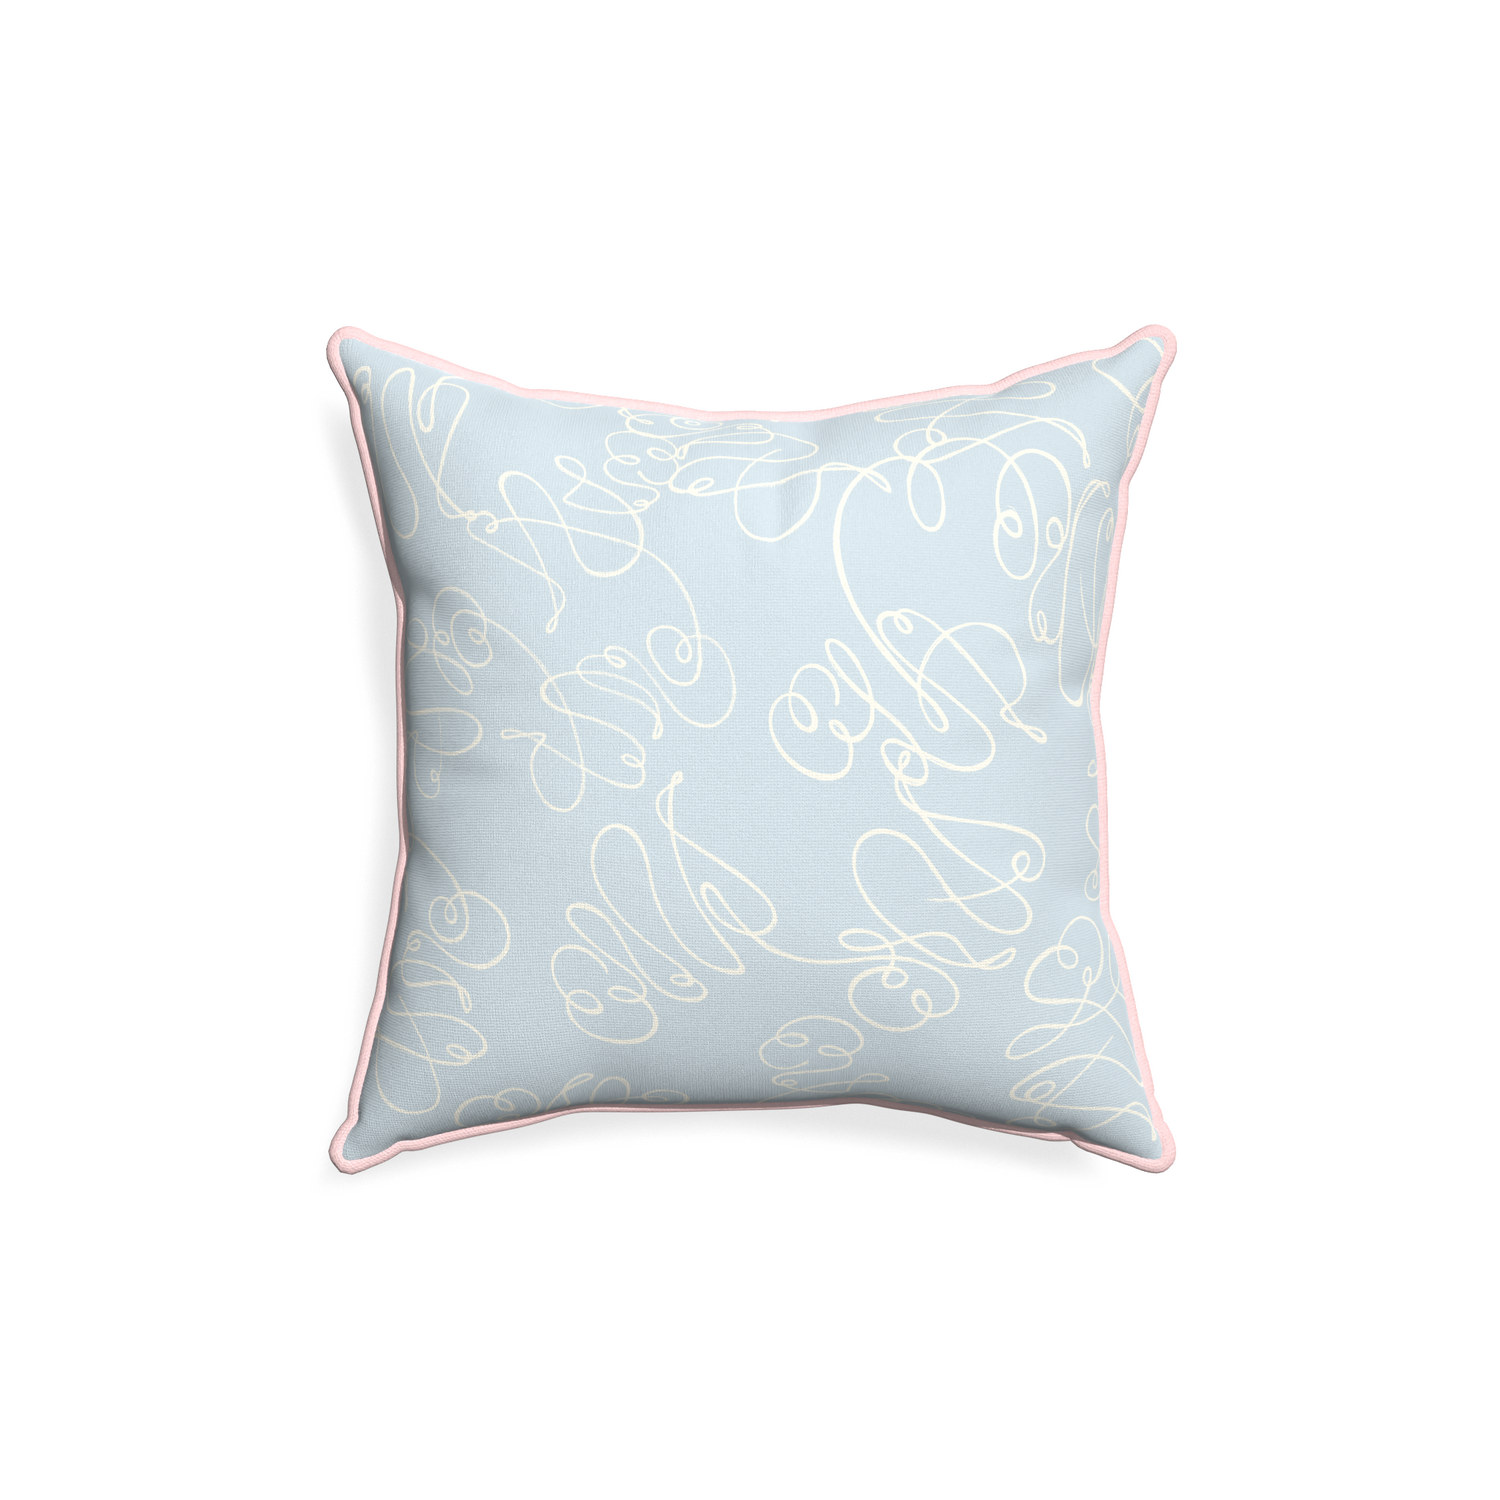 18-square mirabella custom powder blue abstractpillow with petal piping on white background